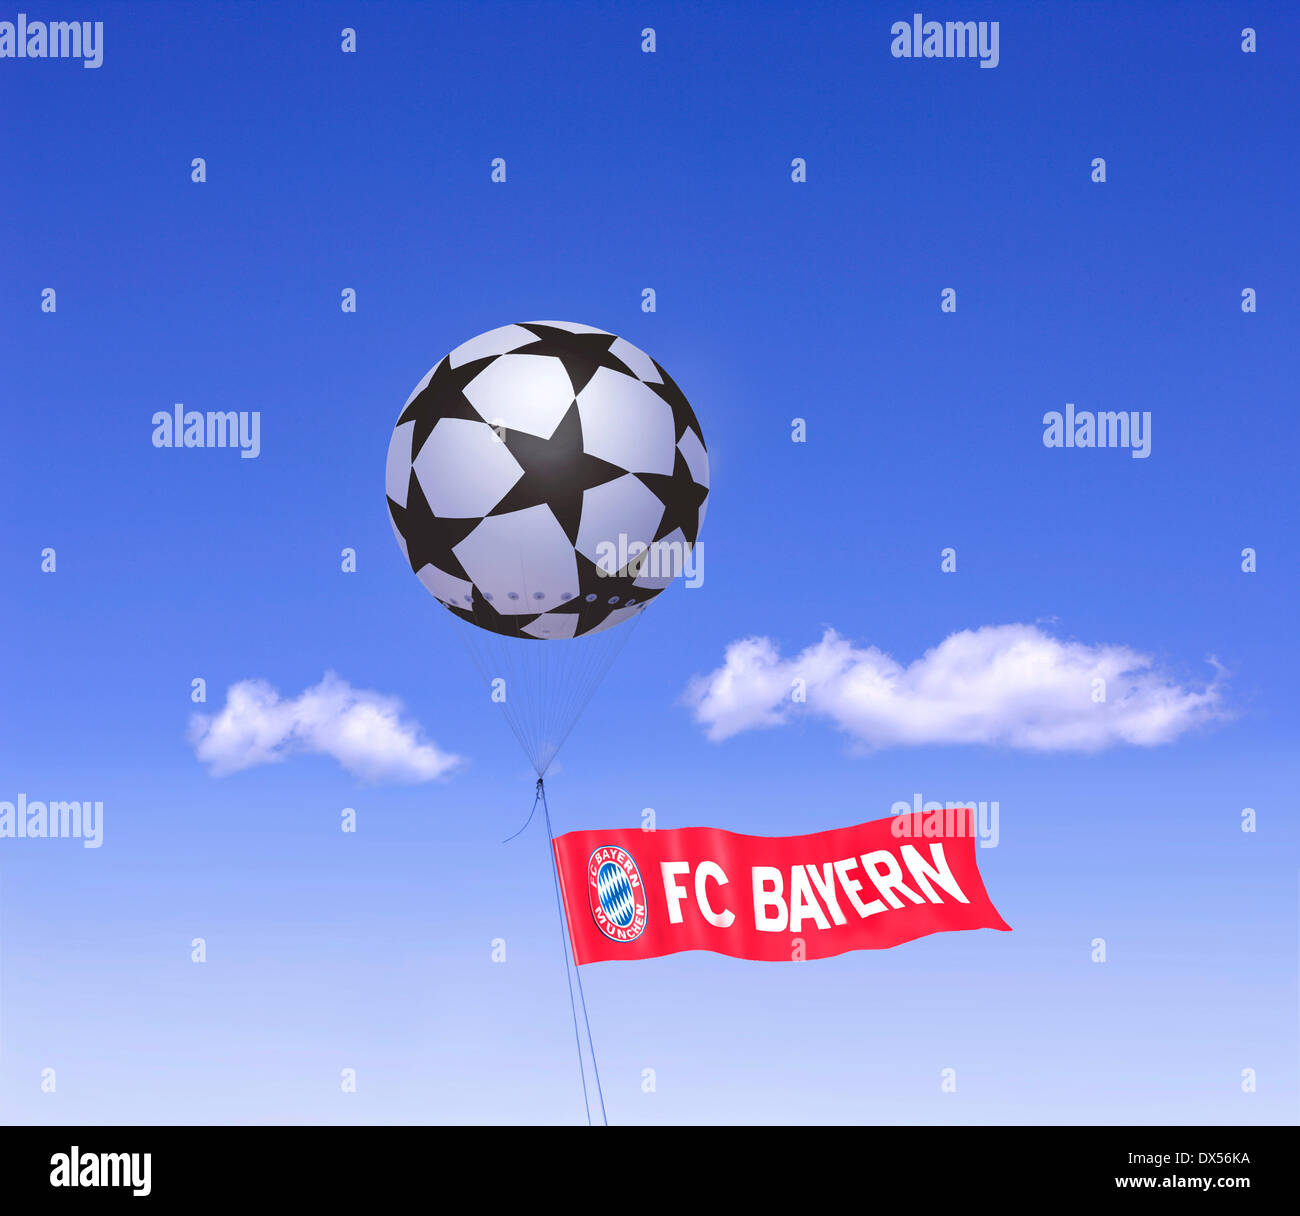 Moored balloon as Champions League football with the flag of FC Bayern Munich Stock Photo